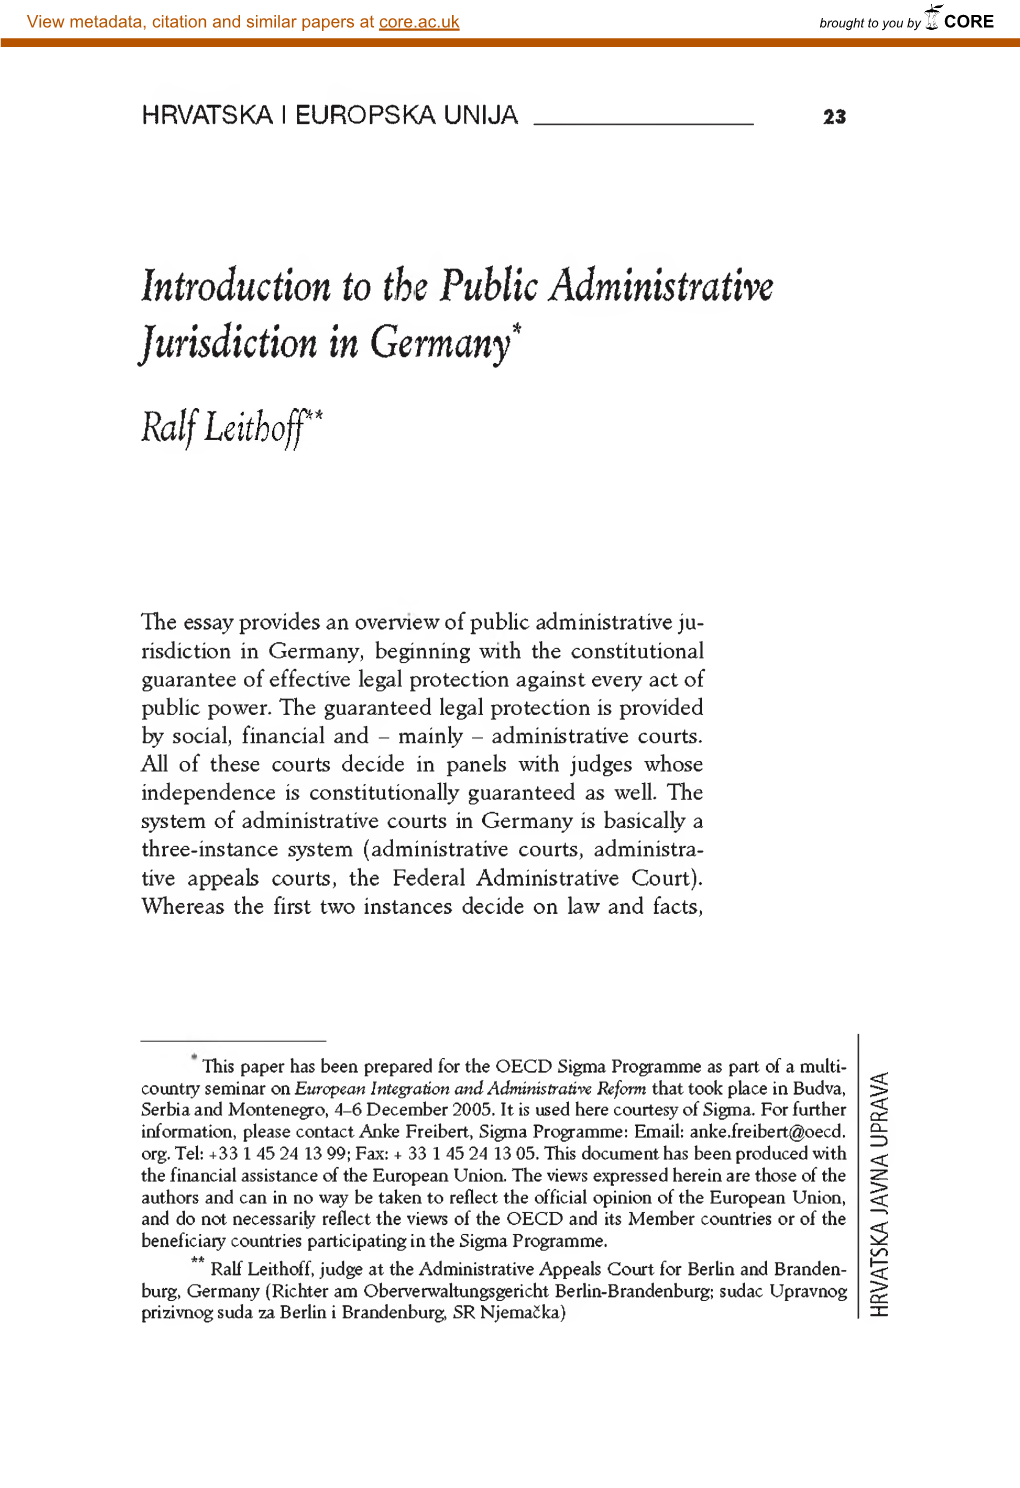 Introduction to the Public Administrative Jurisdiction in Germany" Ralf Leithoff *